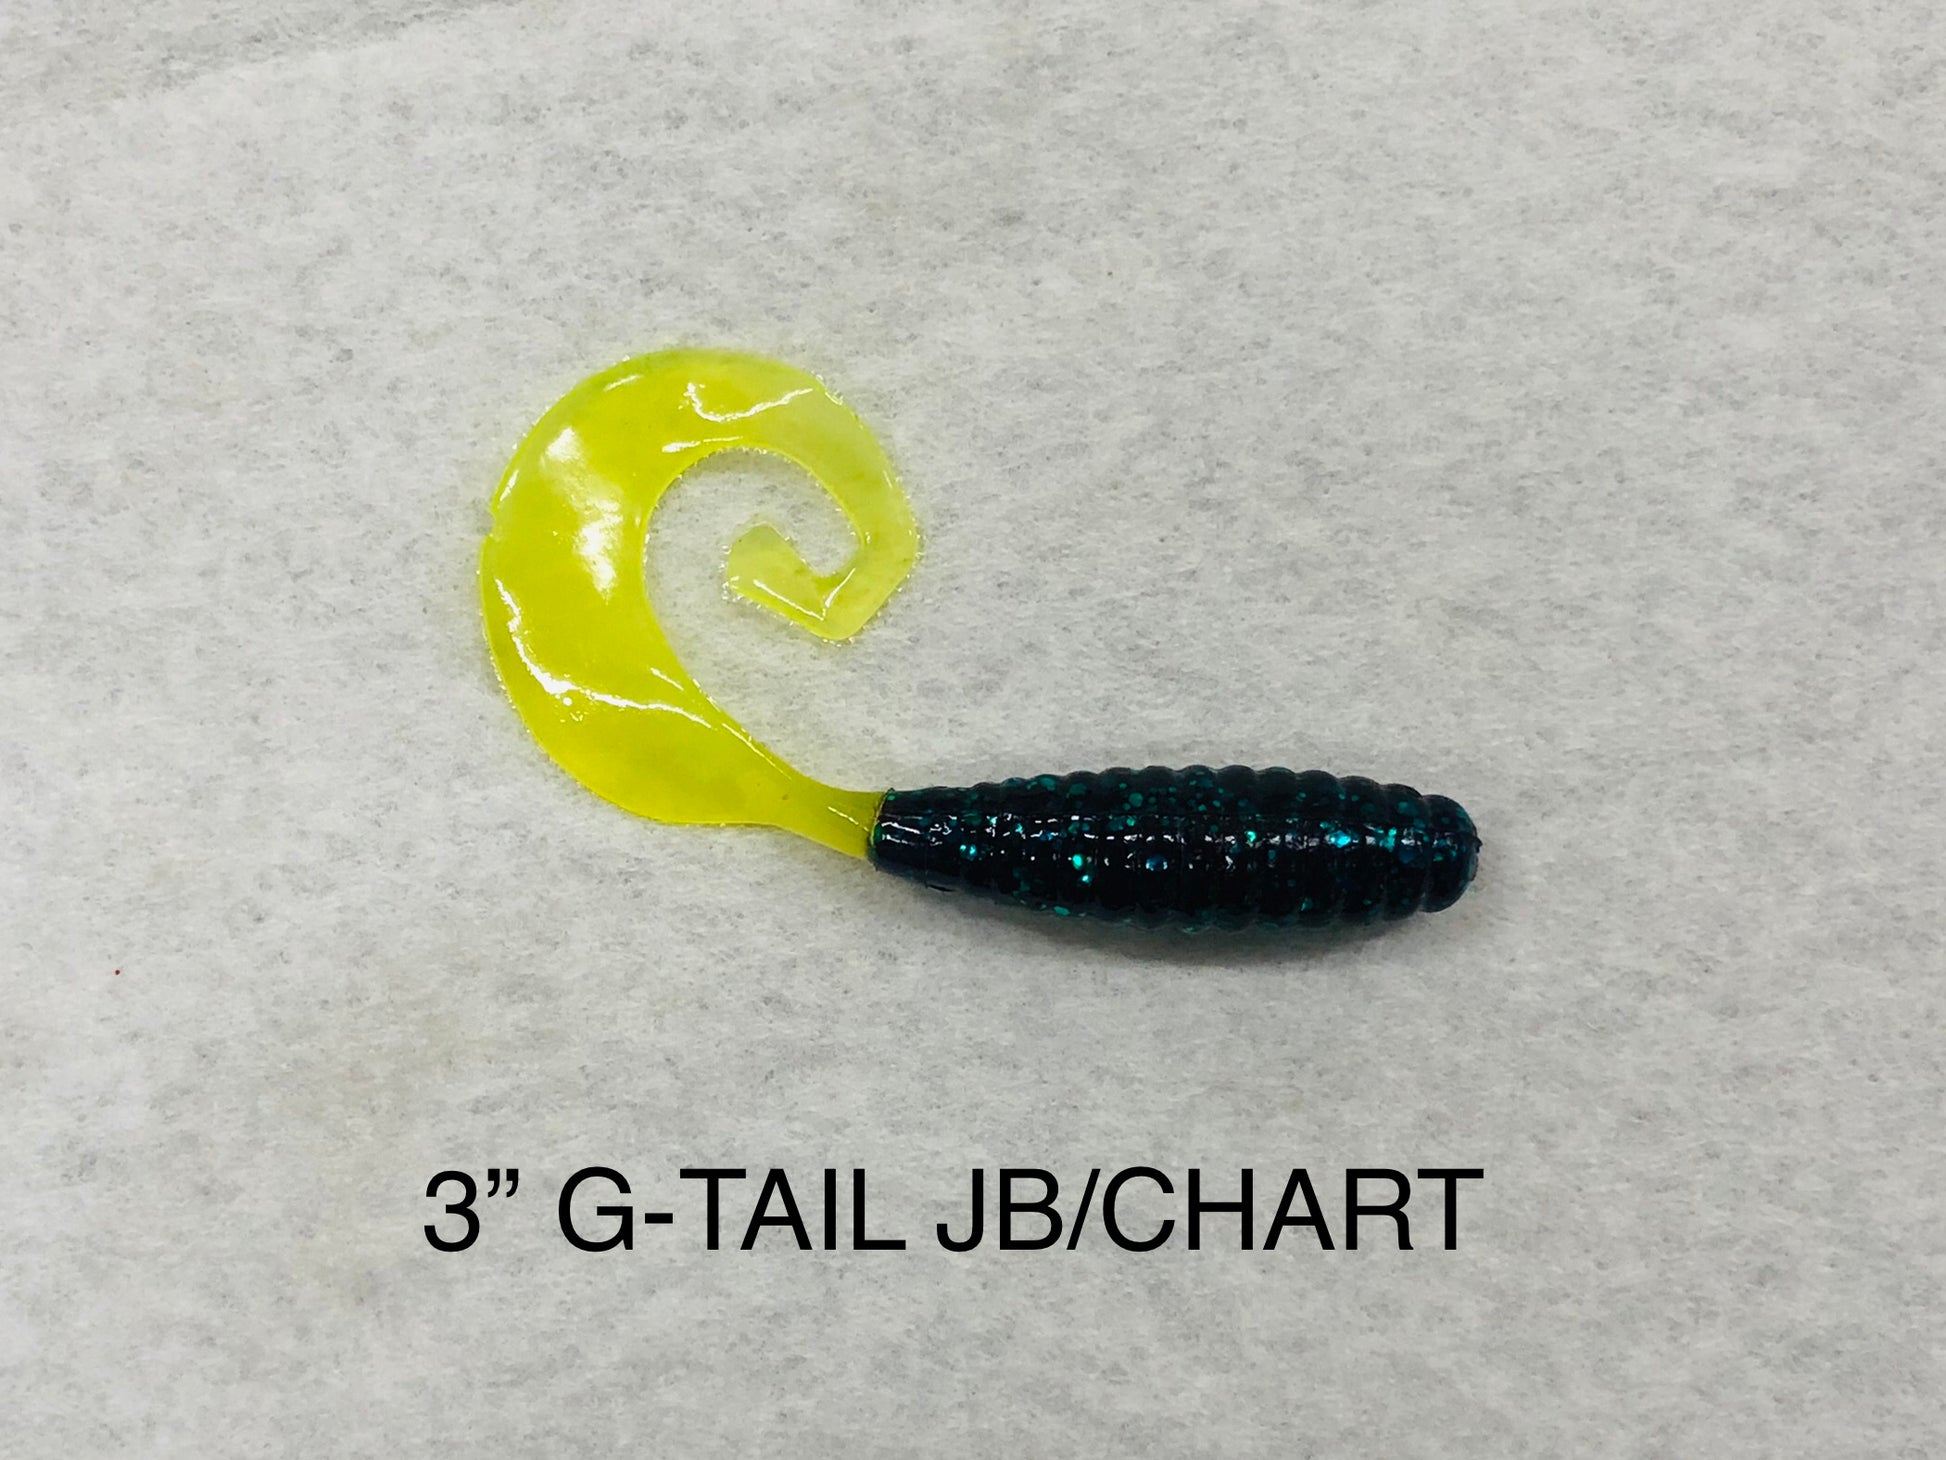 gitzit-g-tail-grub-junebug- chartreuse-3in-19400